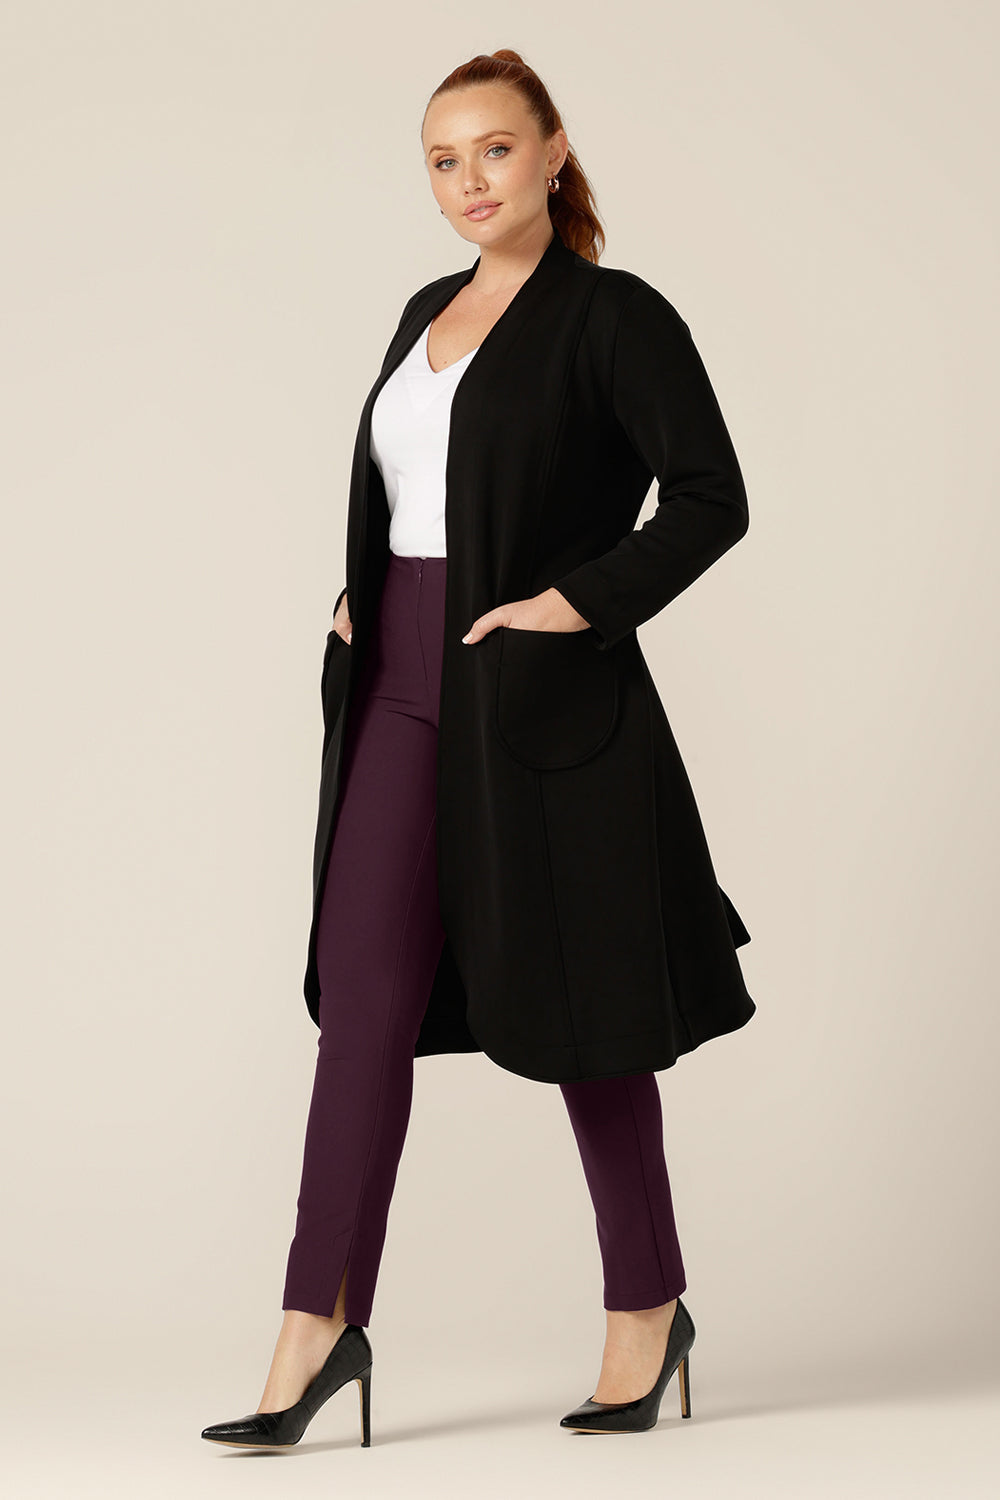 A curvy size 12 woman wears a softly tailored black trenchcoat in modal fabric by Australian and New Zealand women's clothing brand, L&F. Worn with mulberry slim leg pants and a white bamboo jersey top, this is a great coat for winter layering and travel.